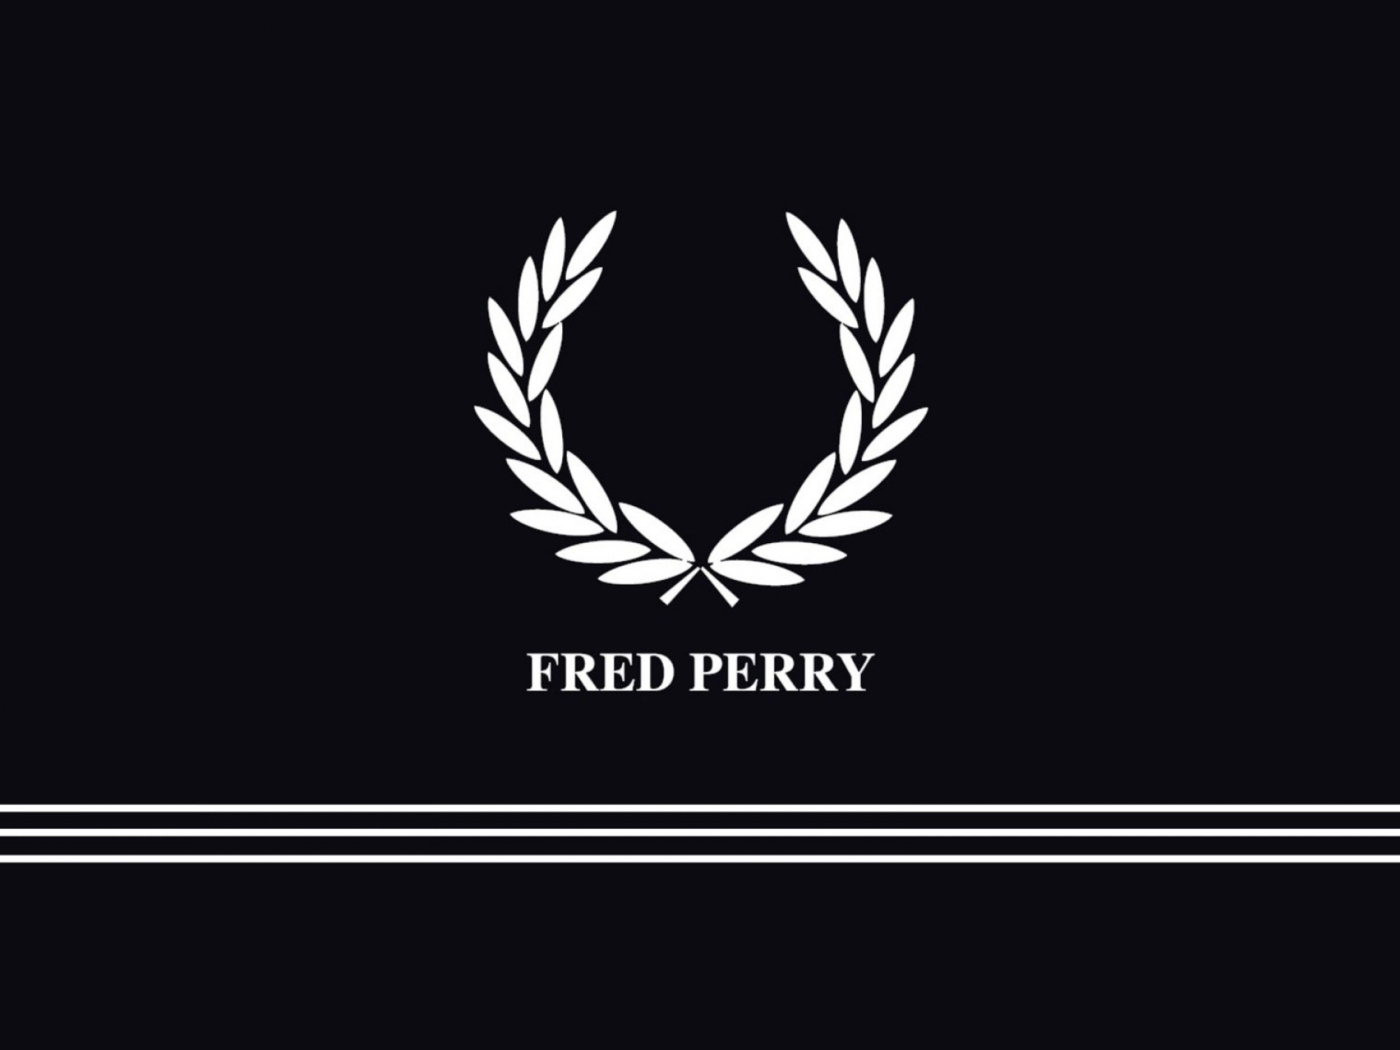 Fred Perry wallpaper 1400x1050